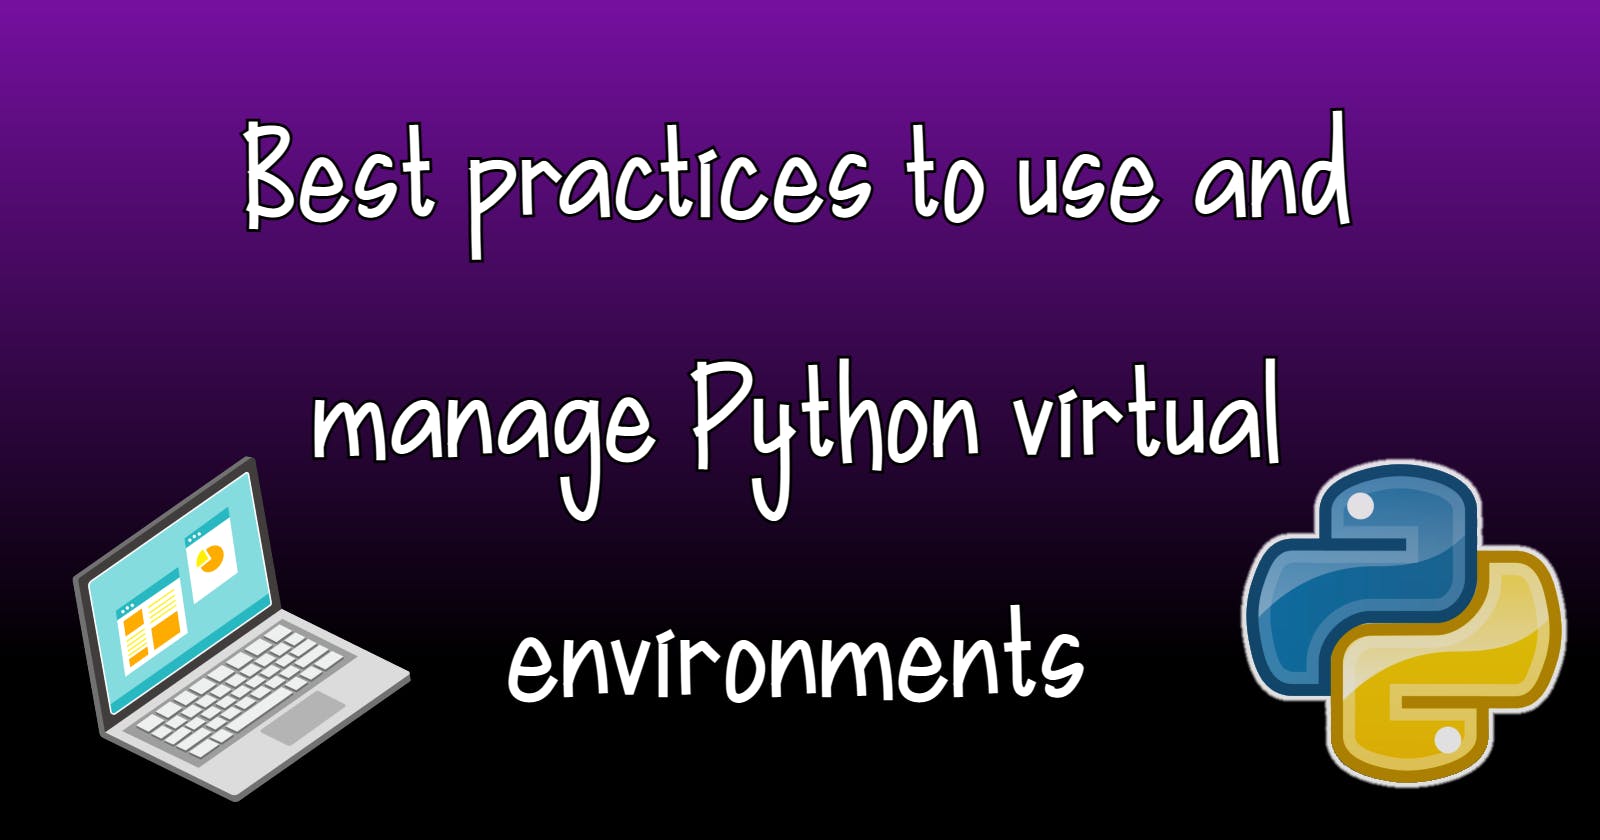 Best practices to use and manage Python virtual environments